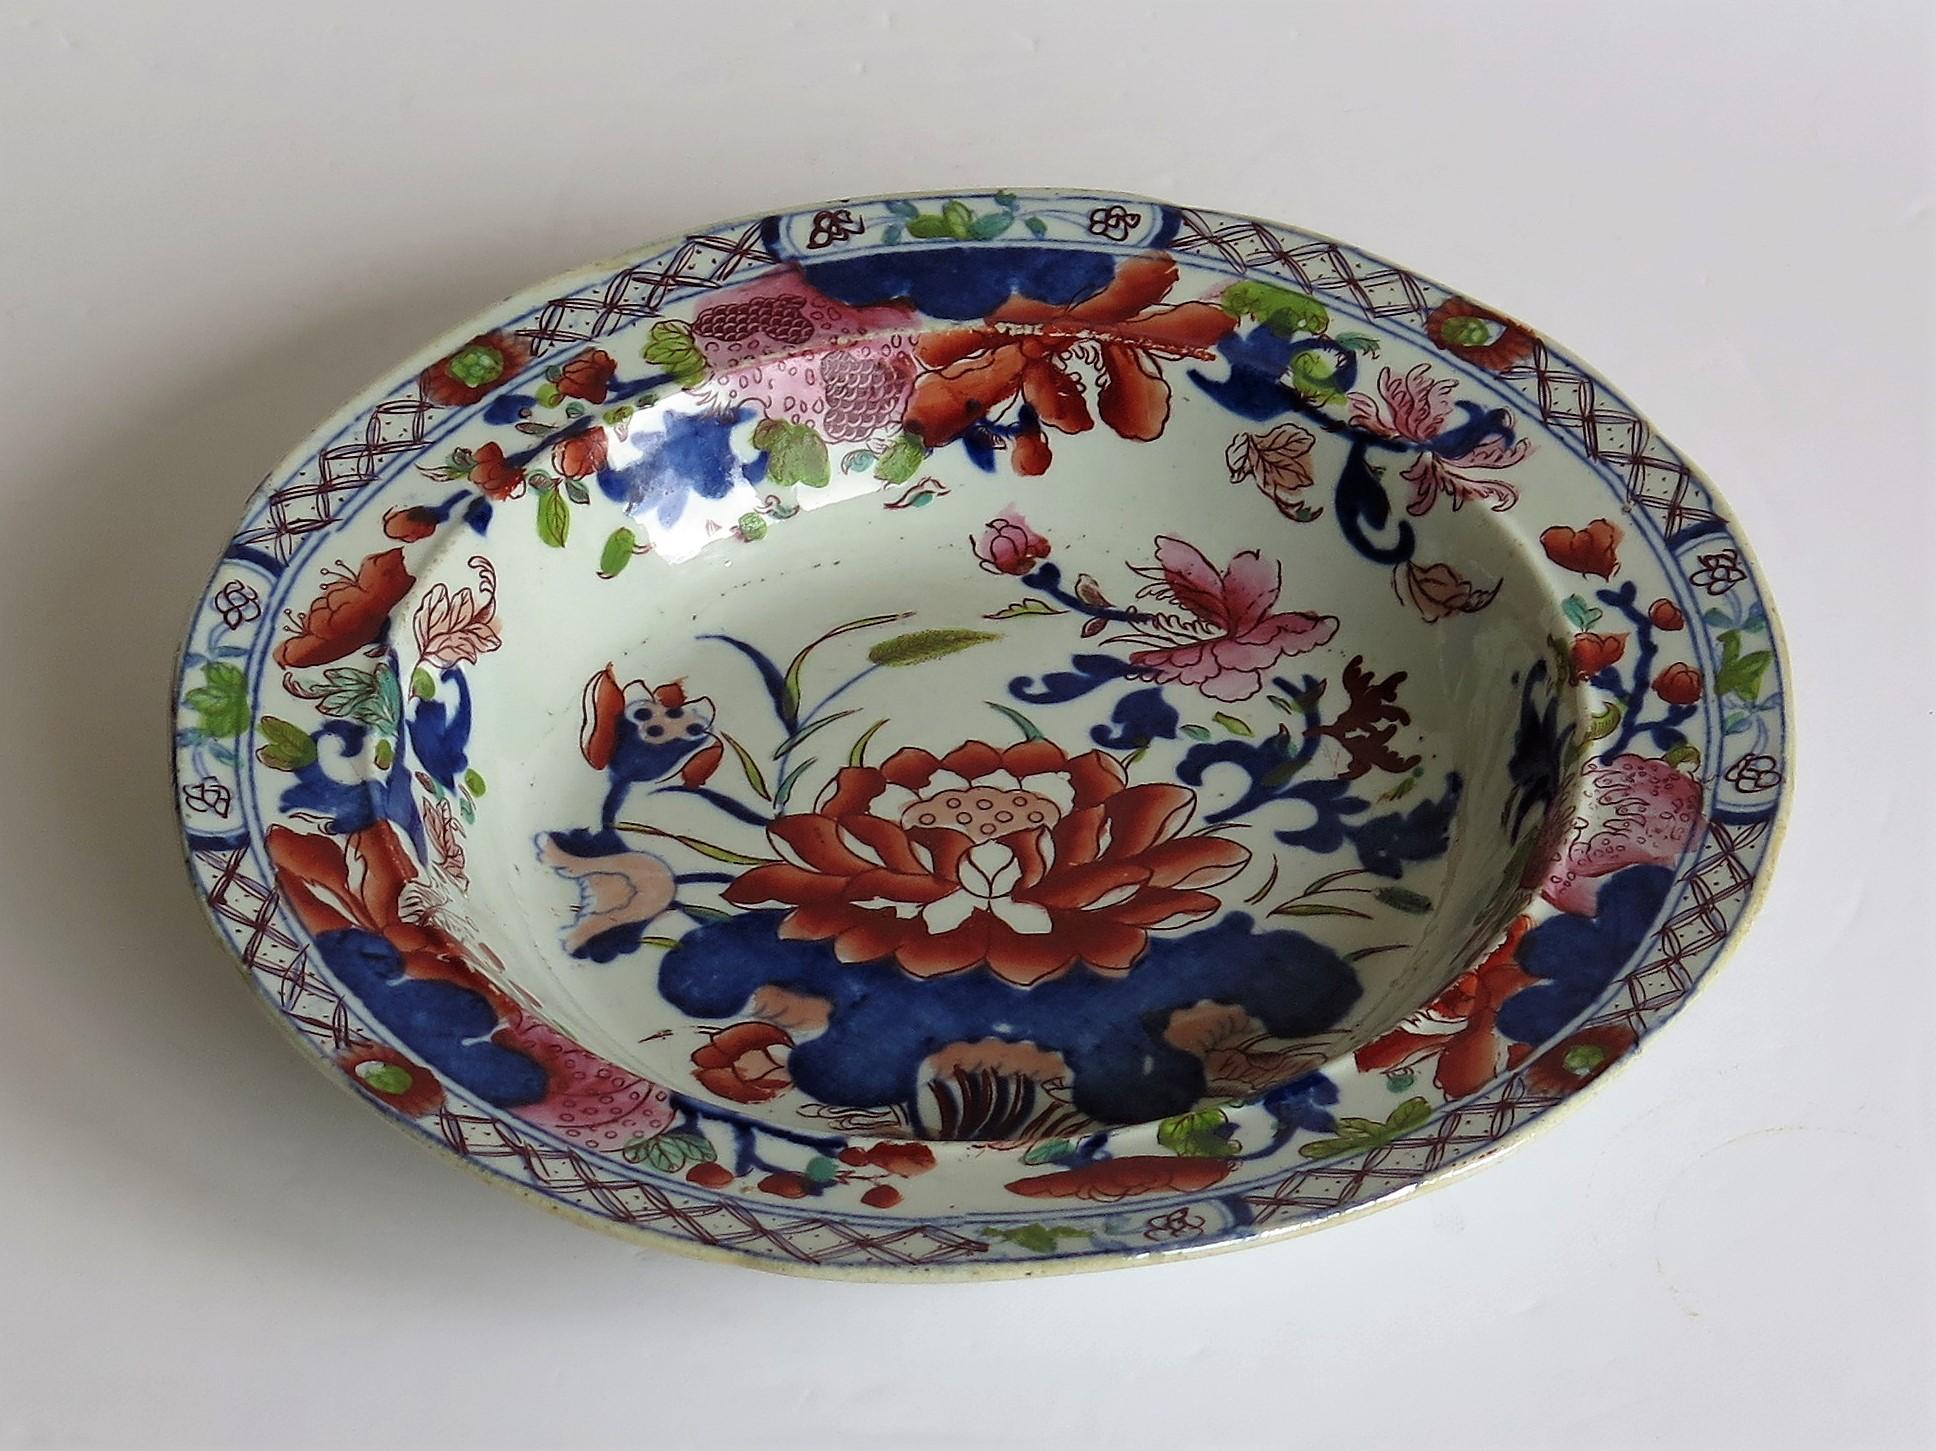 This is a very good early Mason's ironstone pottery soup bowl or deep plate hand painted in the very decorative Water Lily pattern, produced by the Mason's factory at Lane Delph, Staffordshire, England, circa 1813-1820.

The plate is circular with